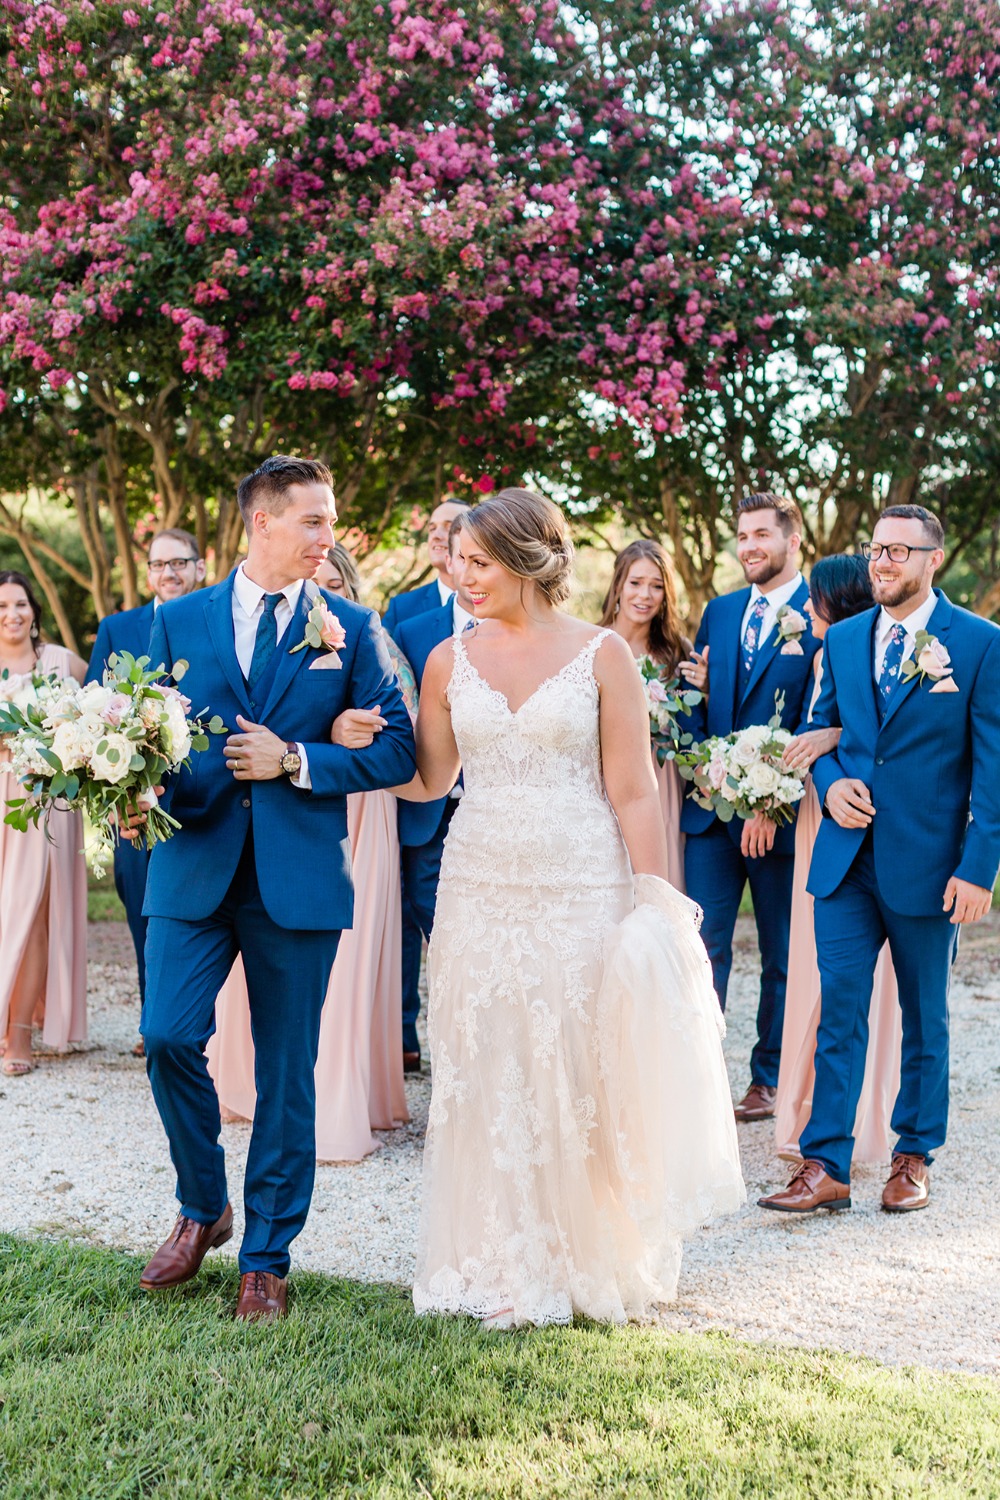 sweet wedding party in royal blue and blush